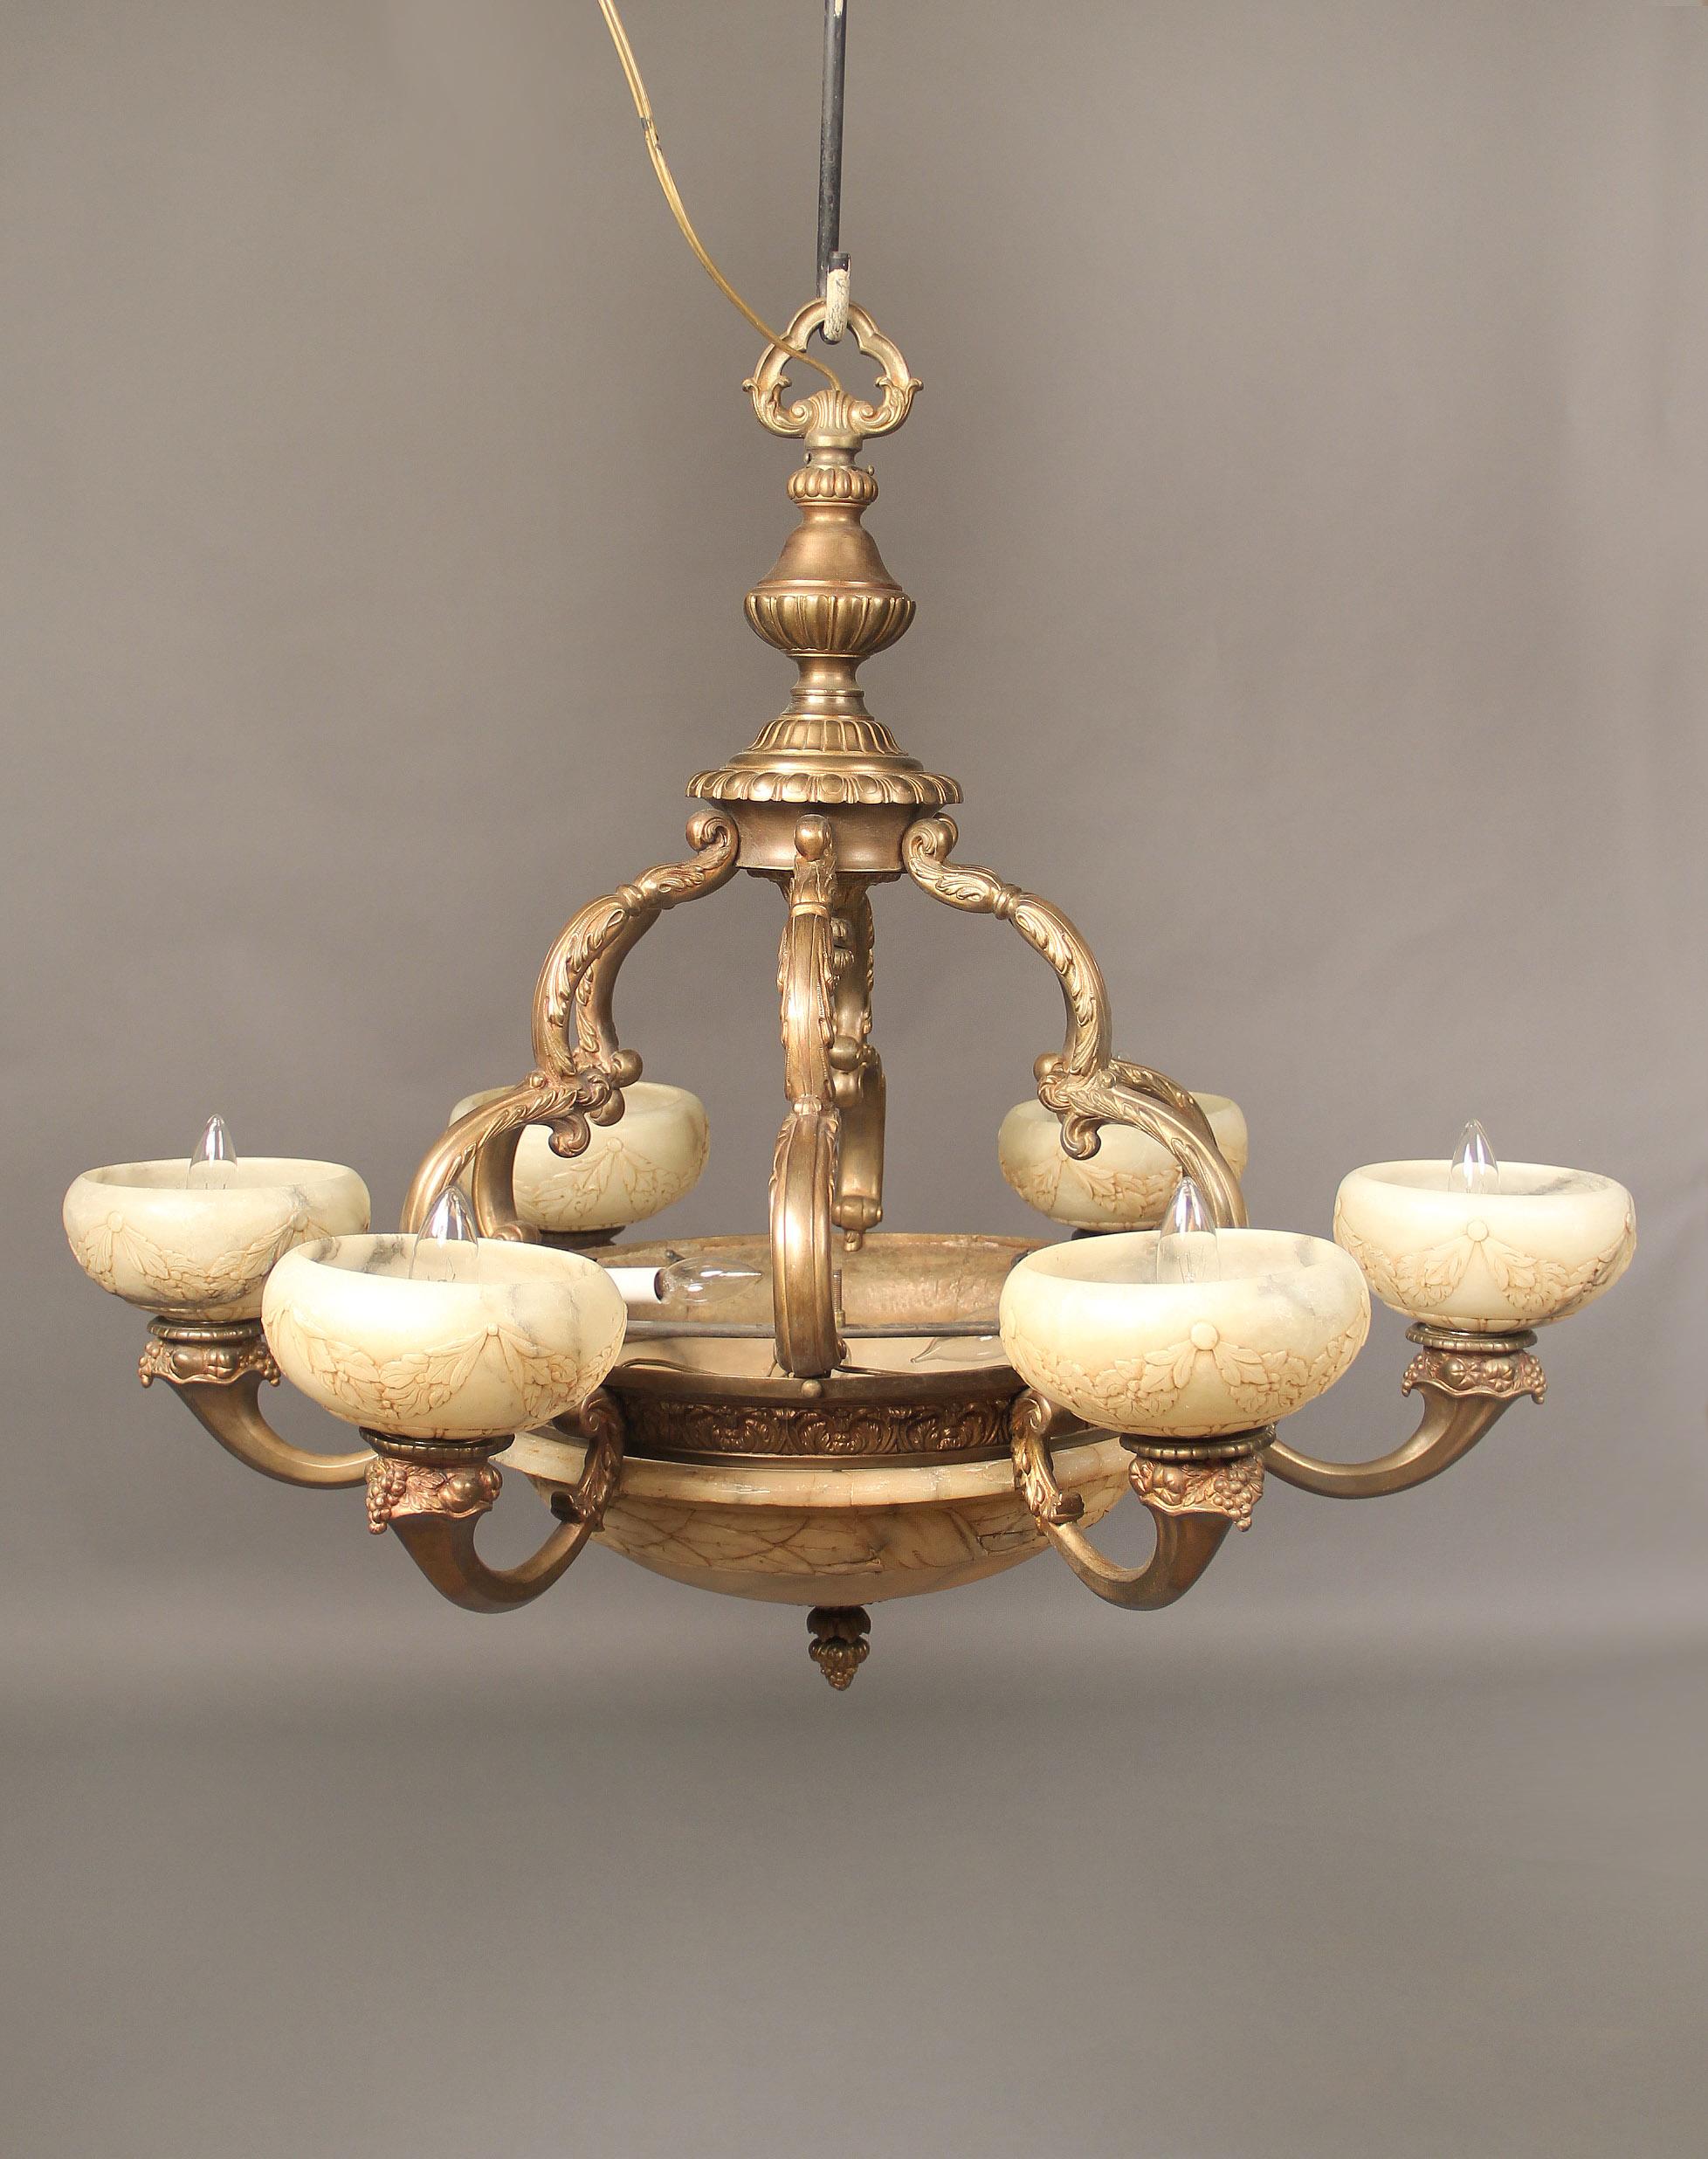 An early 20th century gilt bronze and carved alabaster nine-light chandelier

Gilt bronze frame with six arms connecting the top with the body, the base with a large carved alabaster bowl, six bronze arms designed with fruit and carved alabaster